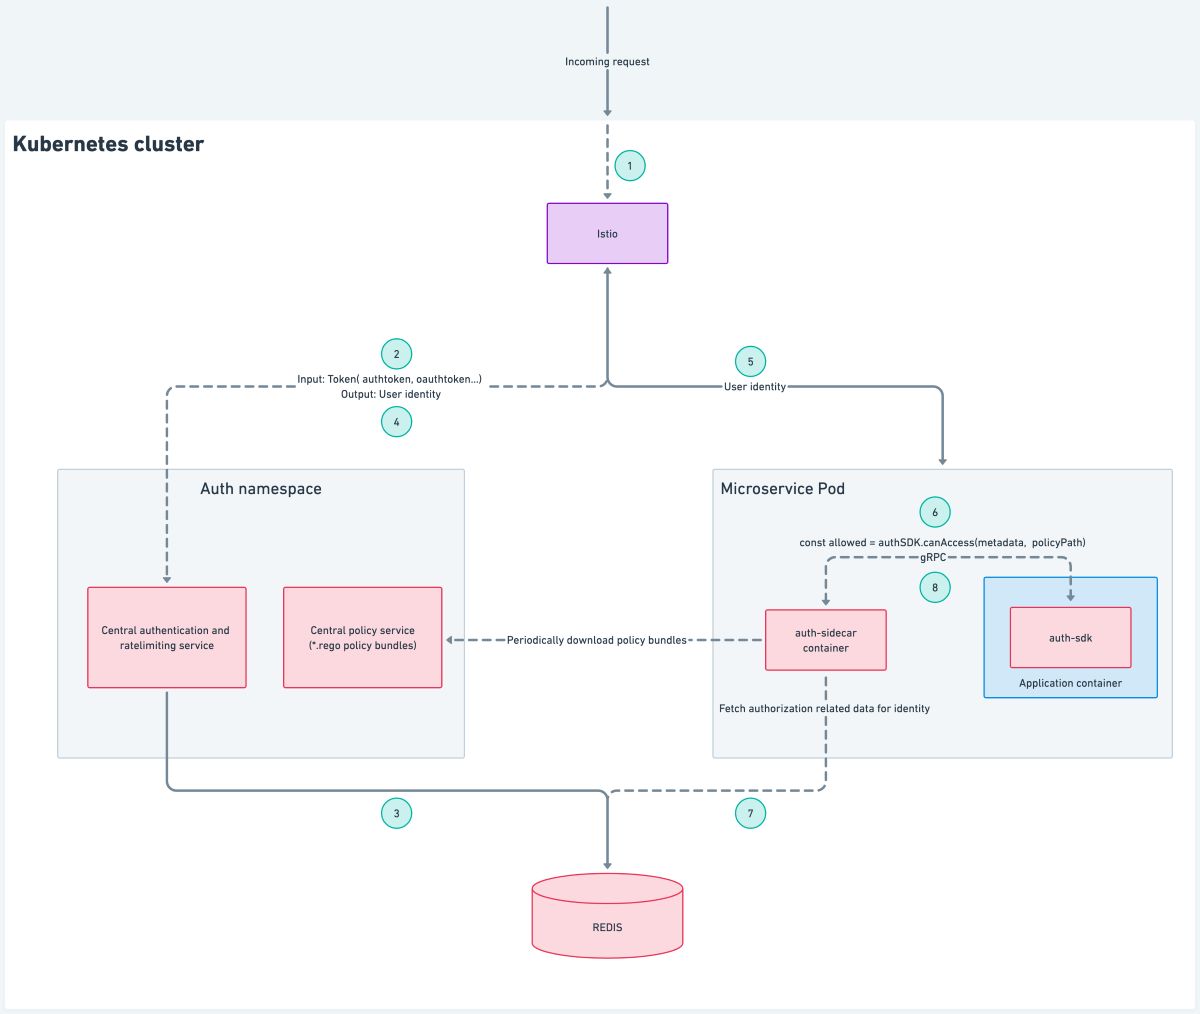 Tracing the request lifecycle in our redesigned auth architecture.